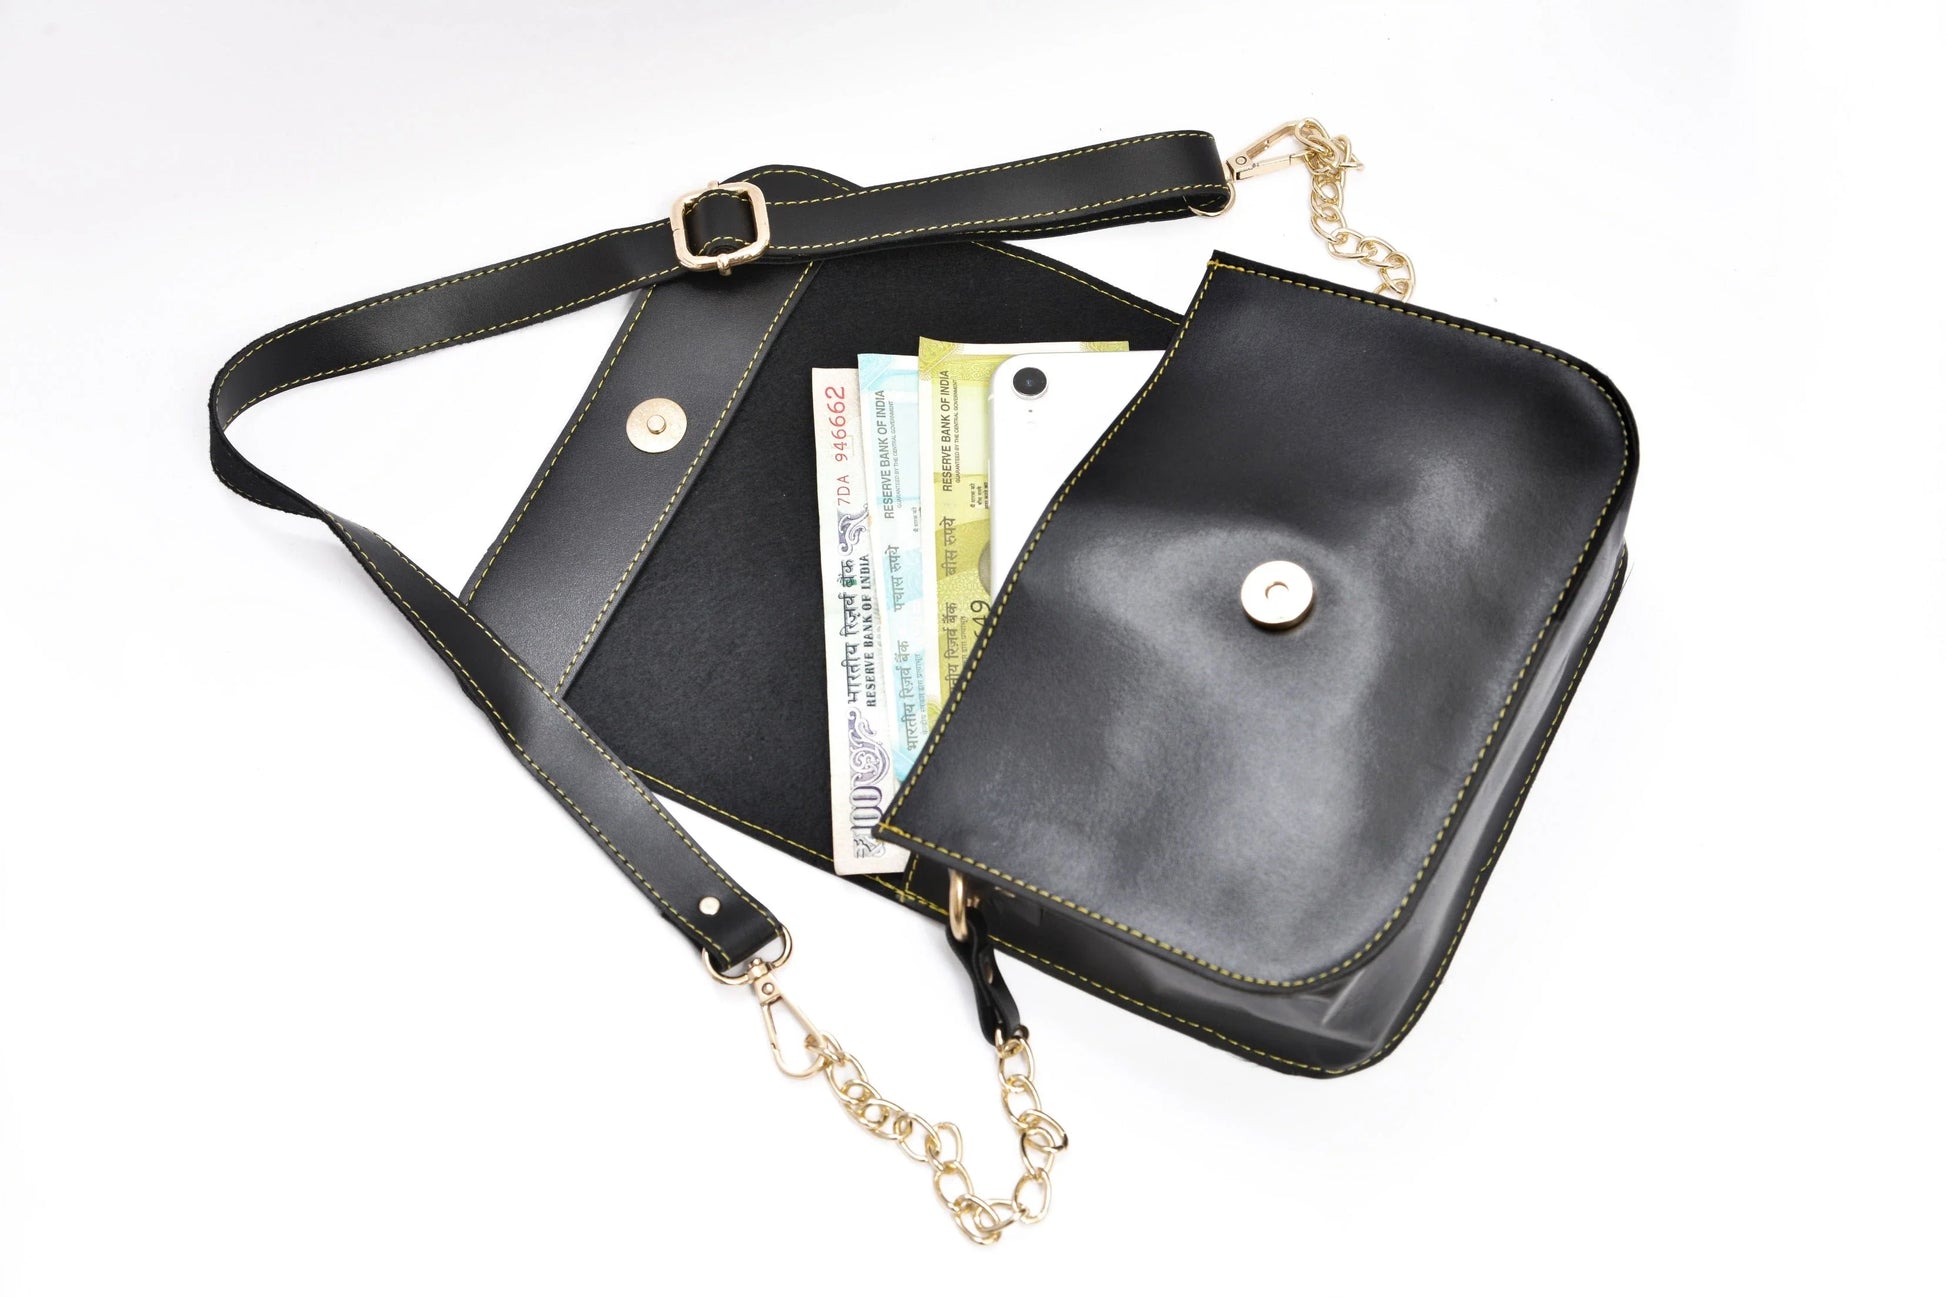 Inside or open view of black chained sling bag